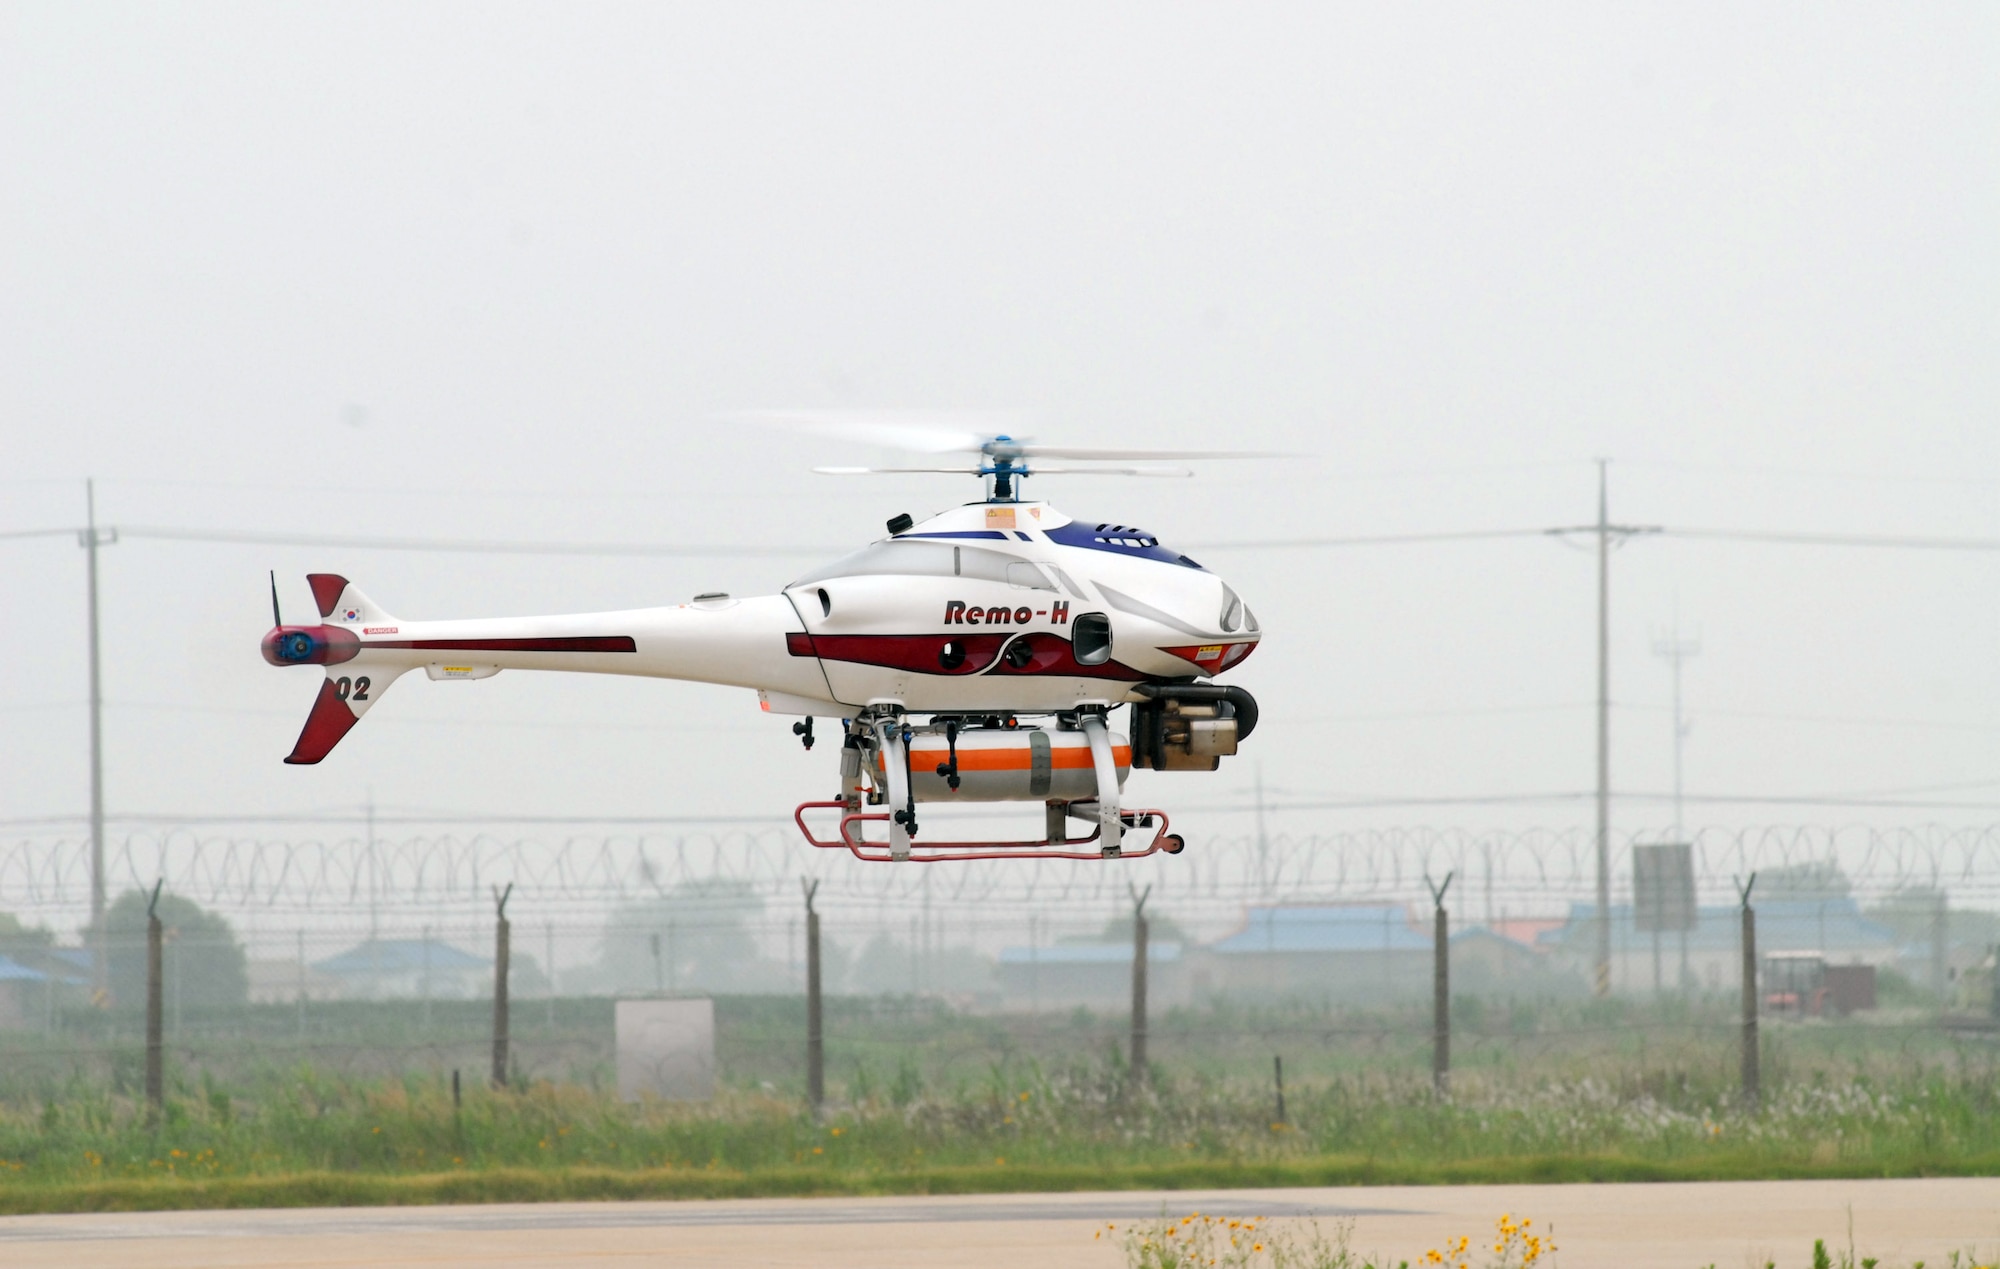 An unmanned aerial vehicle recon system belonging to the South Korean army flies June 24 over Kunsan Air Base, South Korea. South Korean army soldiers demonstrated the capabilities of their nuclear, biological and chemical detection technology during a two-day combined training session here June 23 and 24. (U.S. Air Force photo/Staff Sgt. Areceli Alarcon)